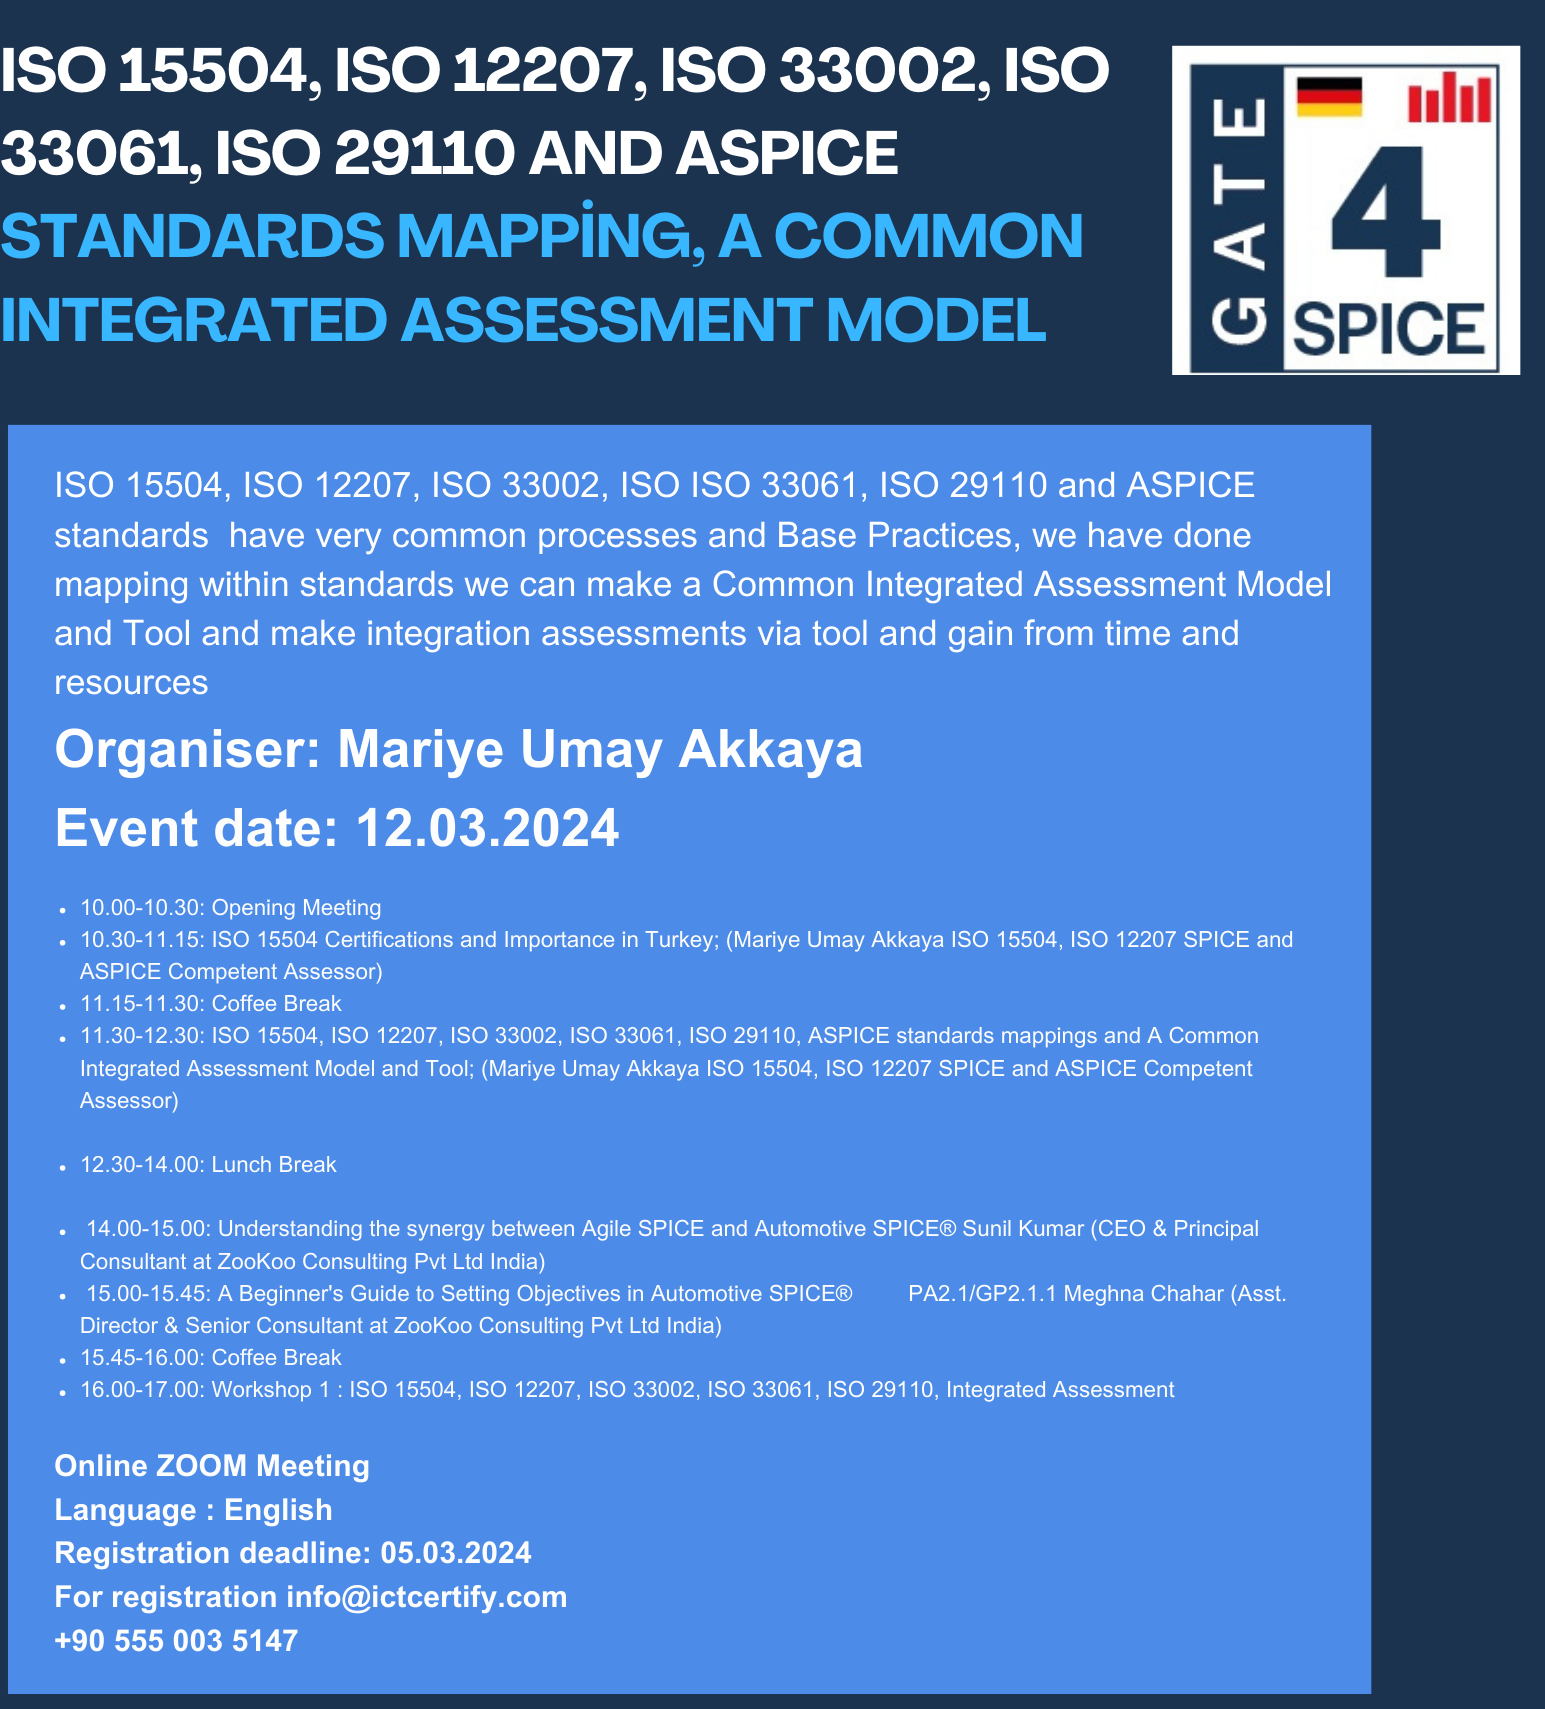 ISO 15504, ISO 12207, ISO 33002, ISO 33061, ISO 29110 and ASPICE standards mapping, a Common Integrated Assessment Model